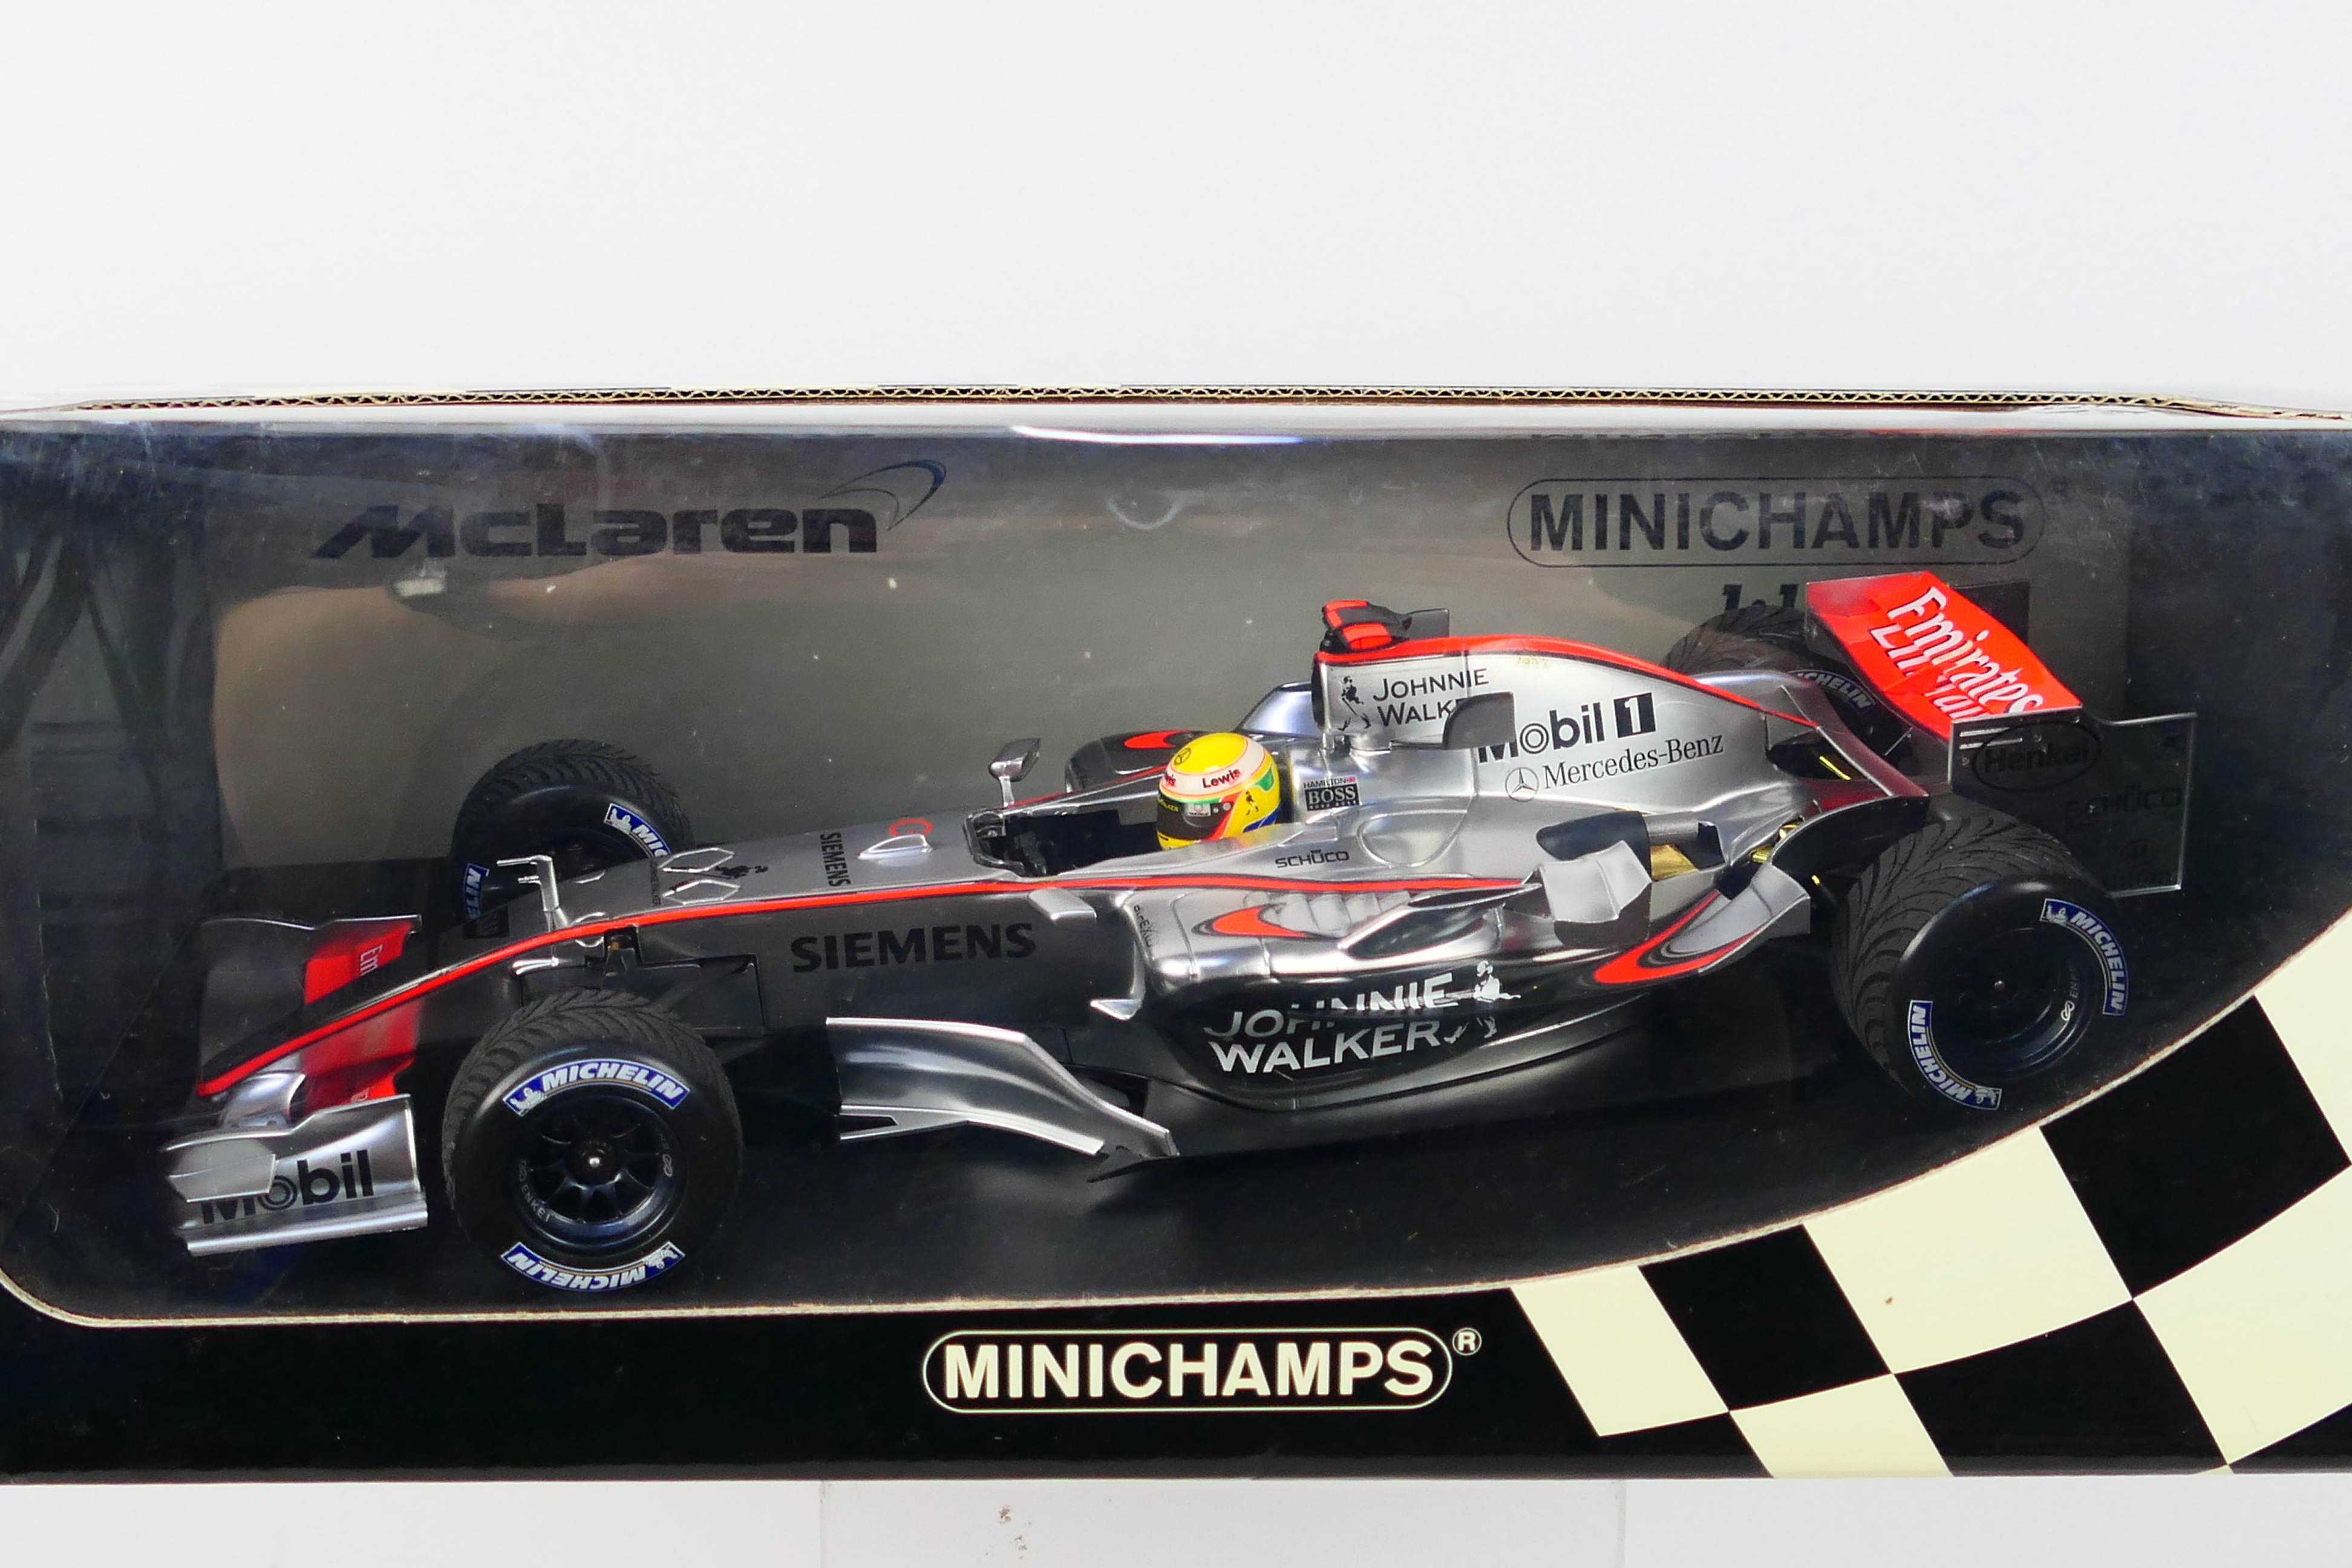 Minichamps - A boxed limited edition 1:18 scale McLaren Mercedes MP4-21 Lewis Hamilton 1st roll out - Image 2 of 3